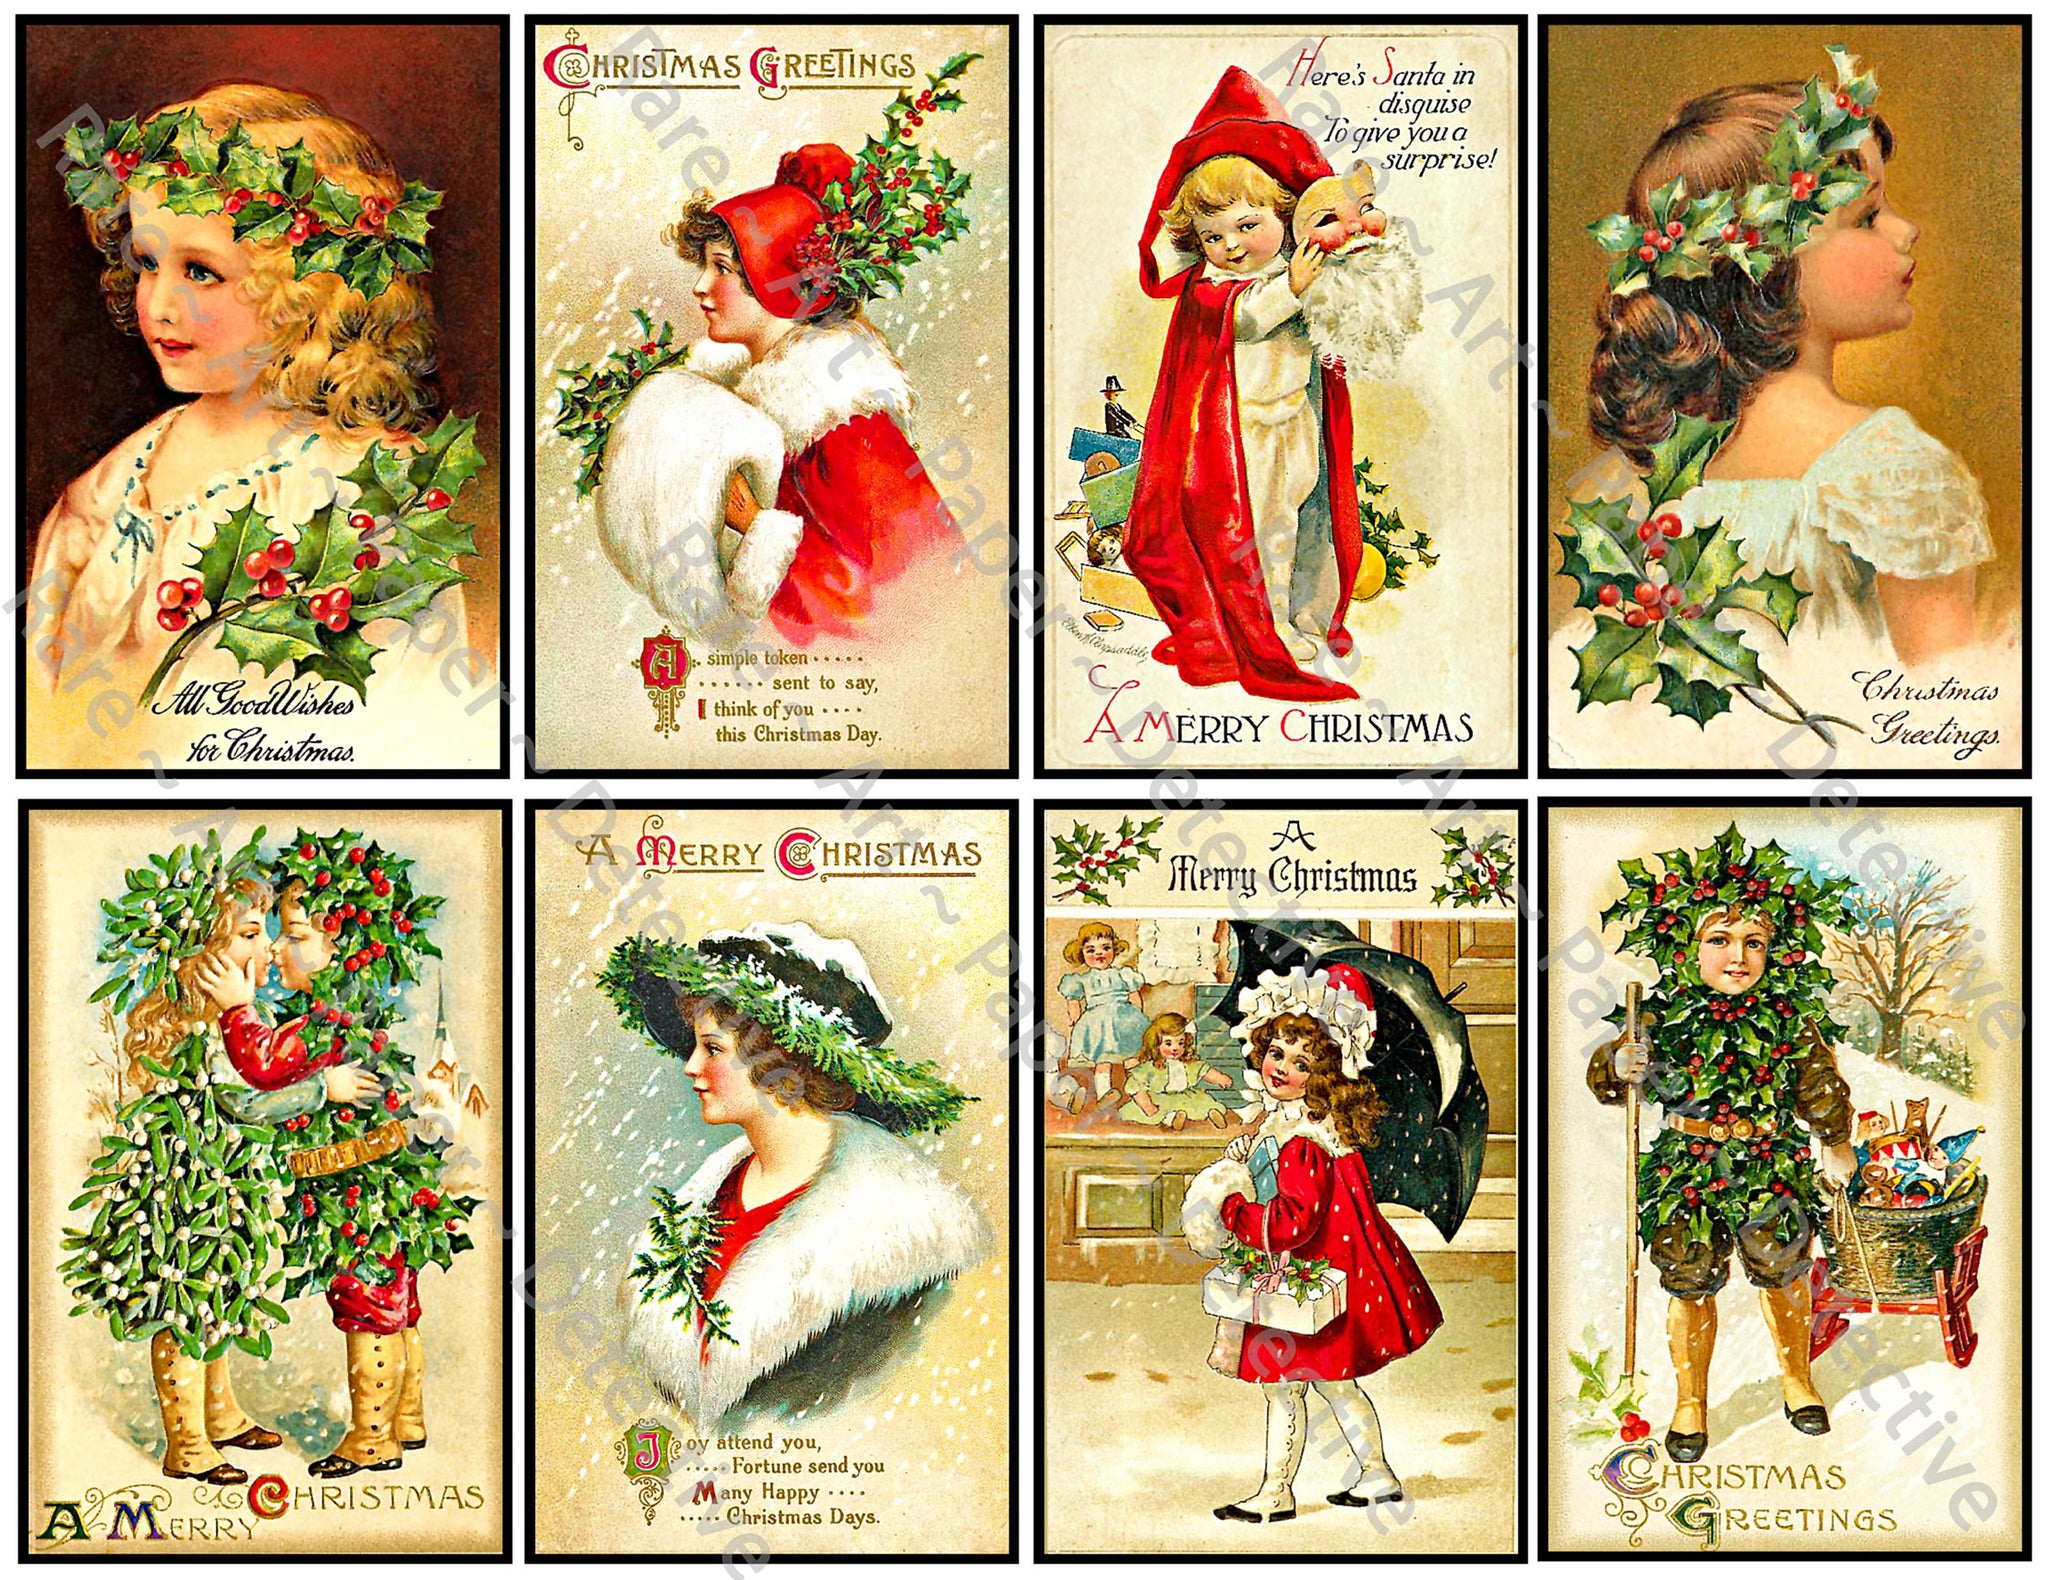 Vintage Christmas Stickers, 8 Pcs. Deluxe Set of Old Fashioned